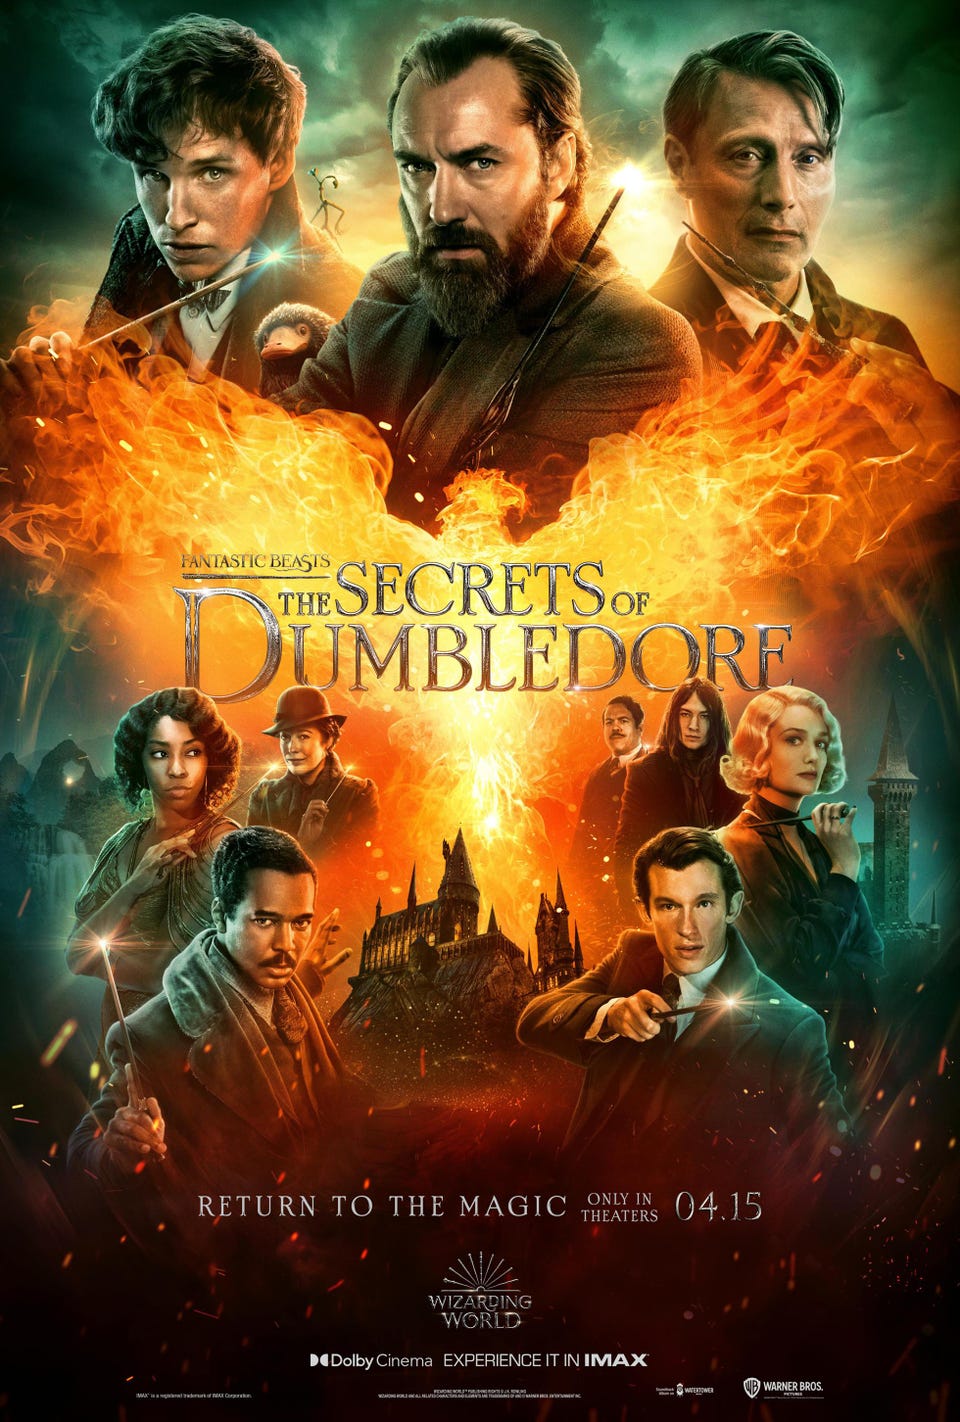 Fantastic Beasts The Secrets of Dumbledore (2022) New Hollywood Hindi Dubbed Full Movie PreDvD